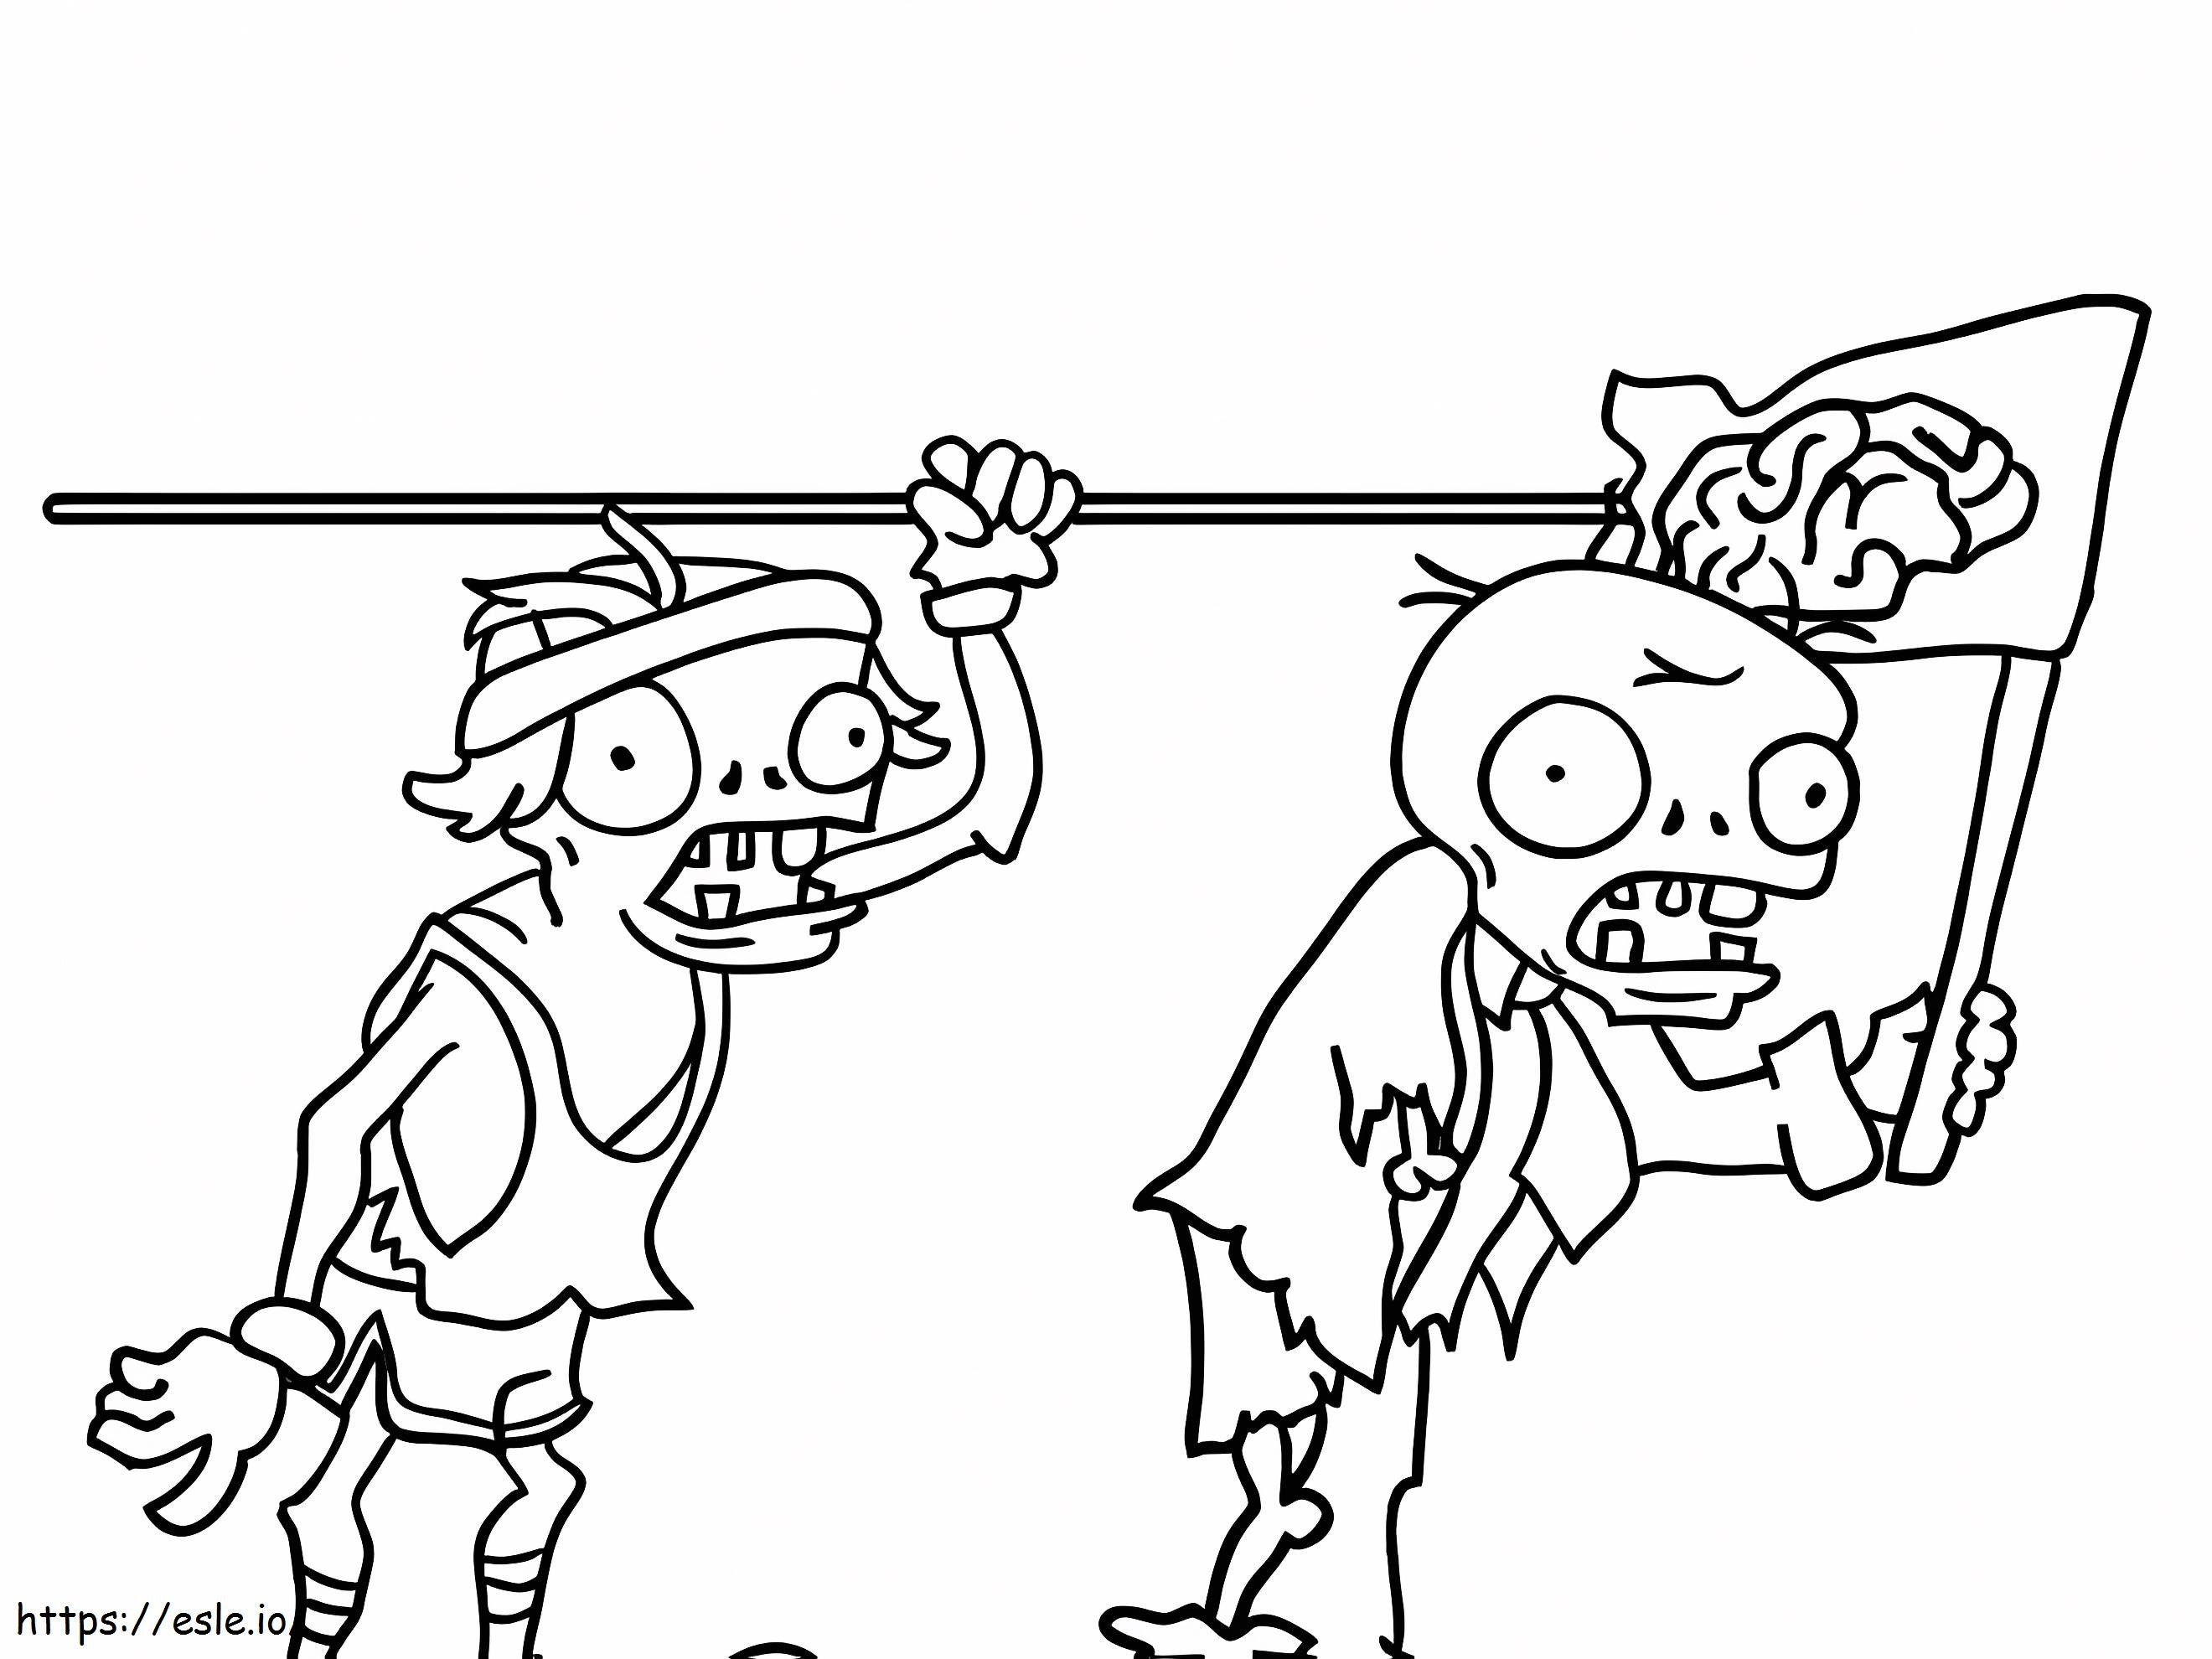 Two Zombies coloring page